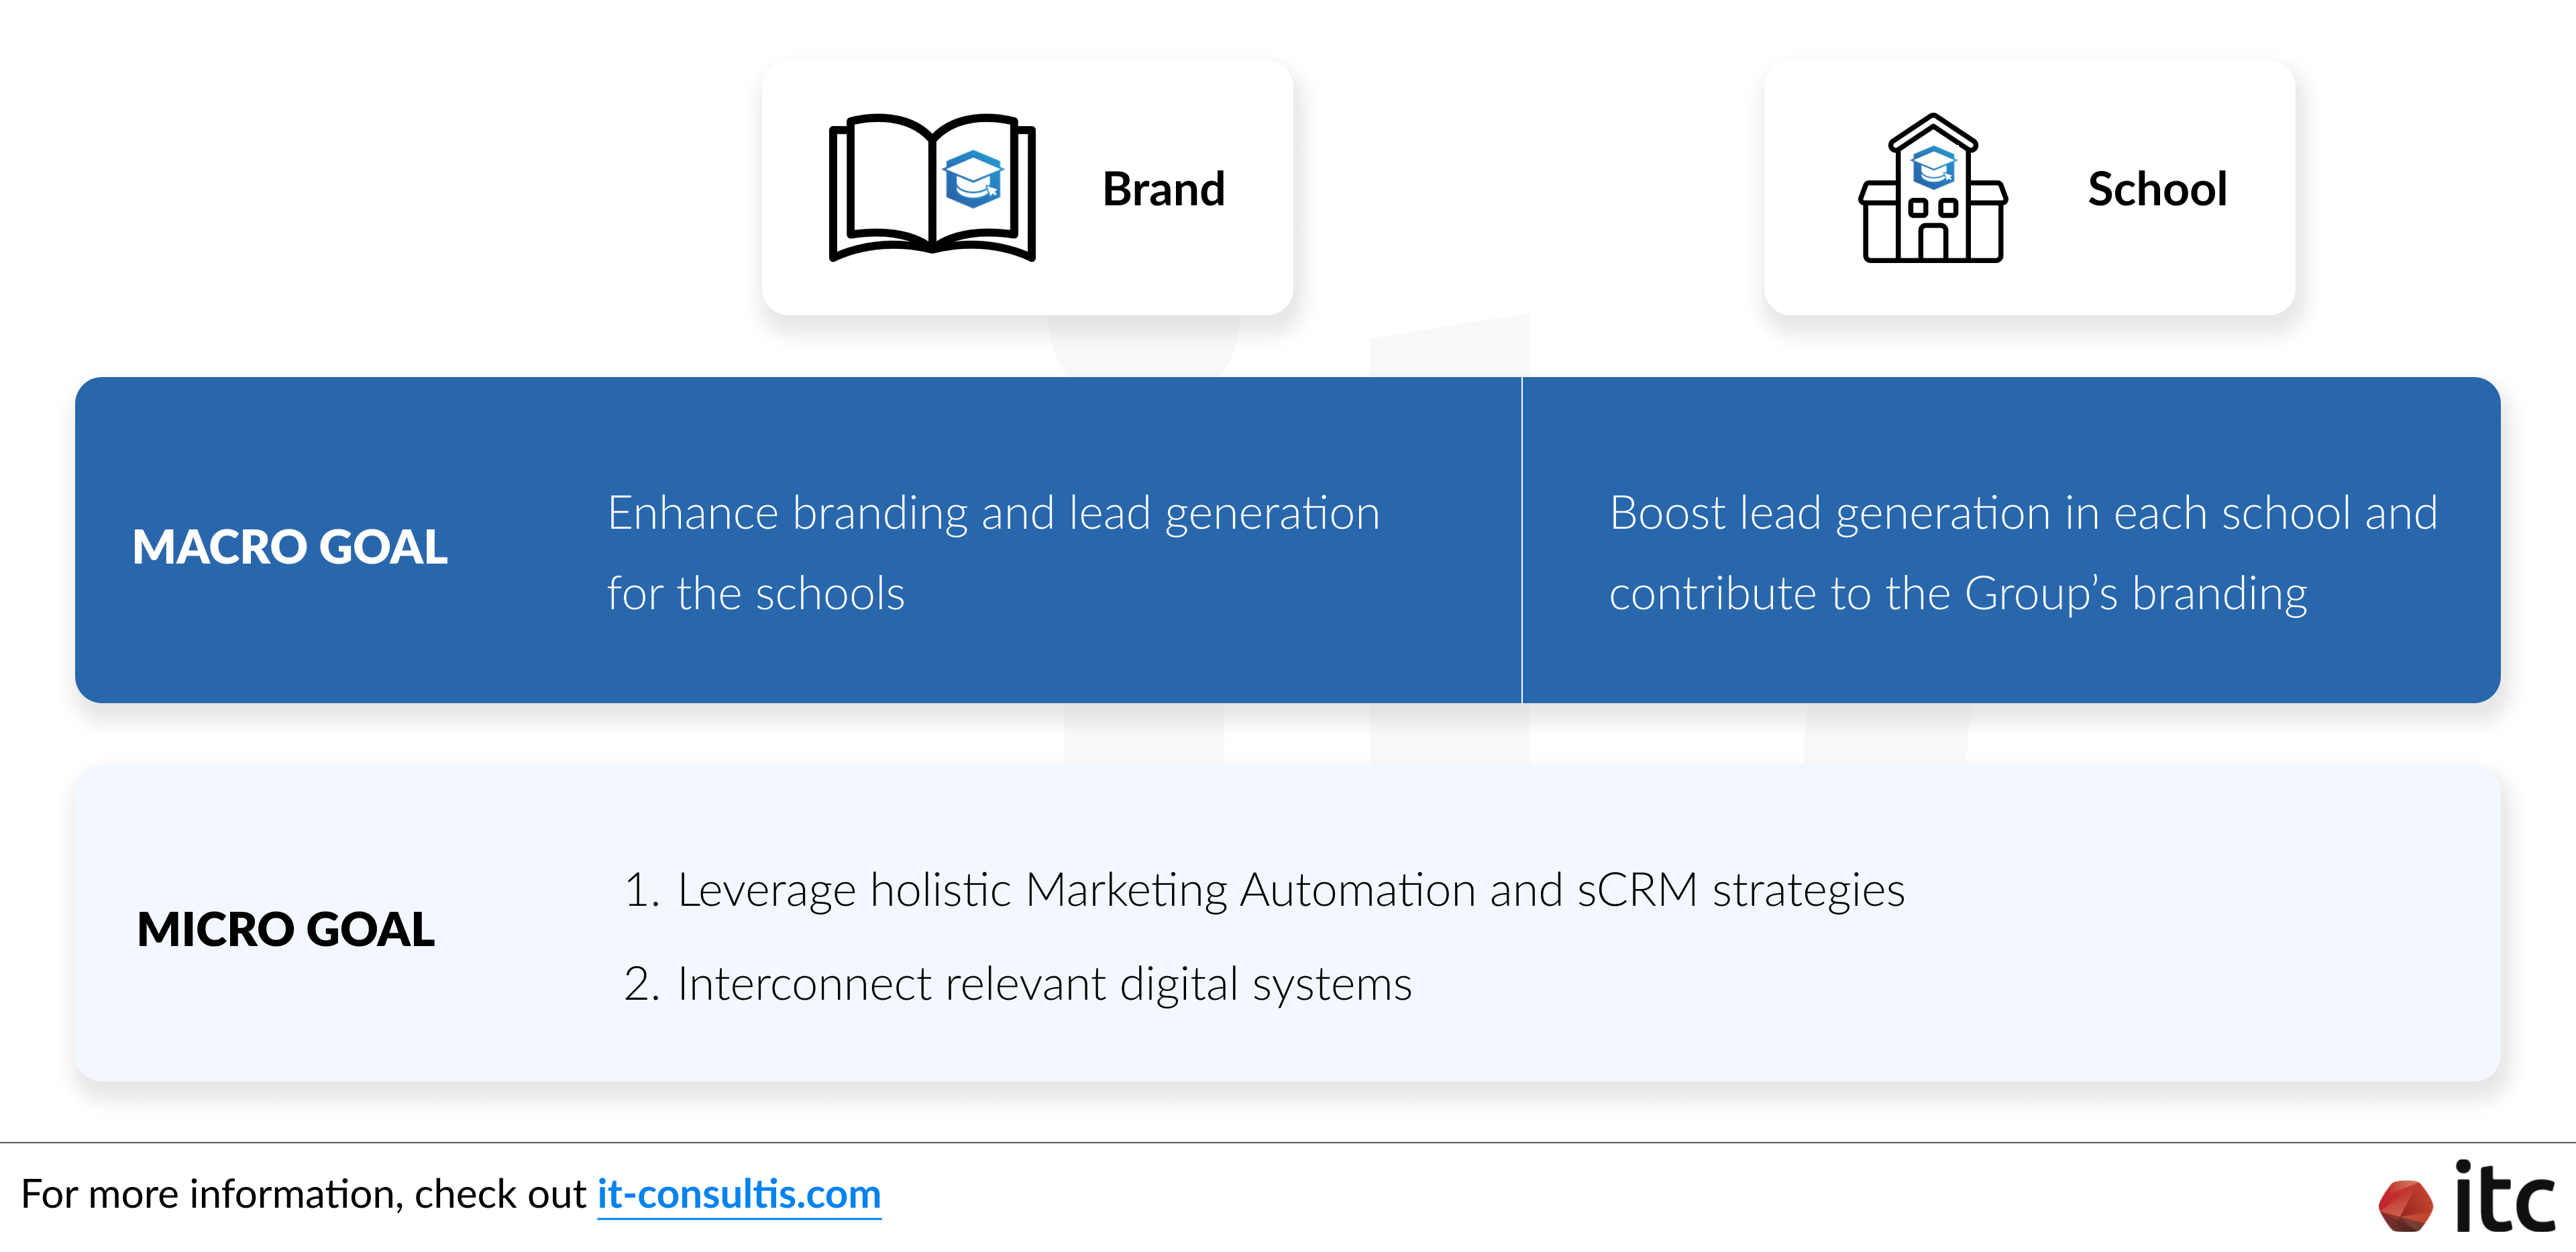 The Macro and Micro goals of the Marketing Automation and Social CRM initiative for the Brand and School-level of an education group in China